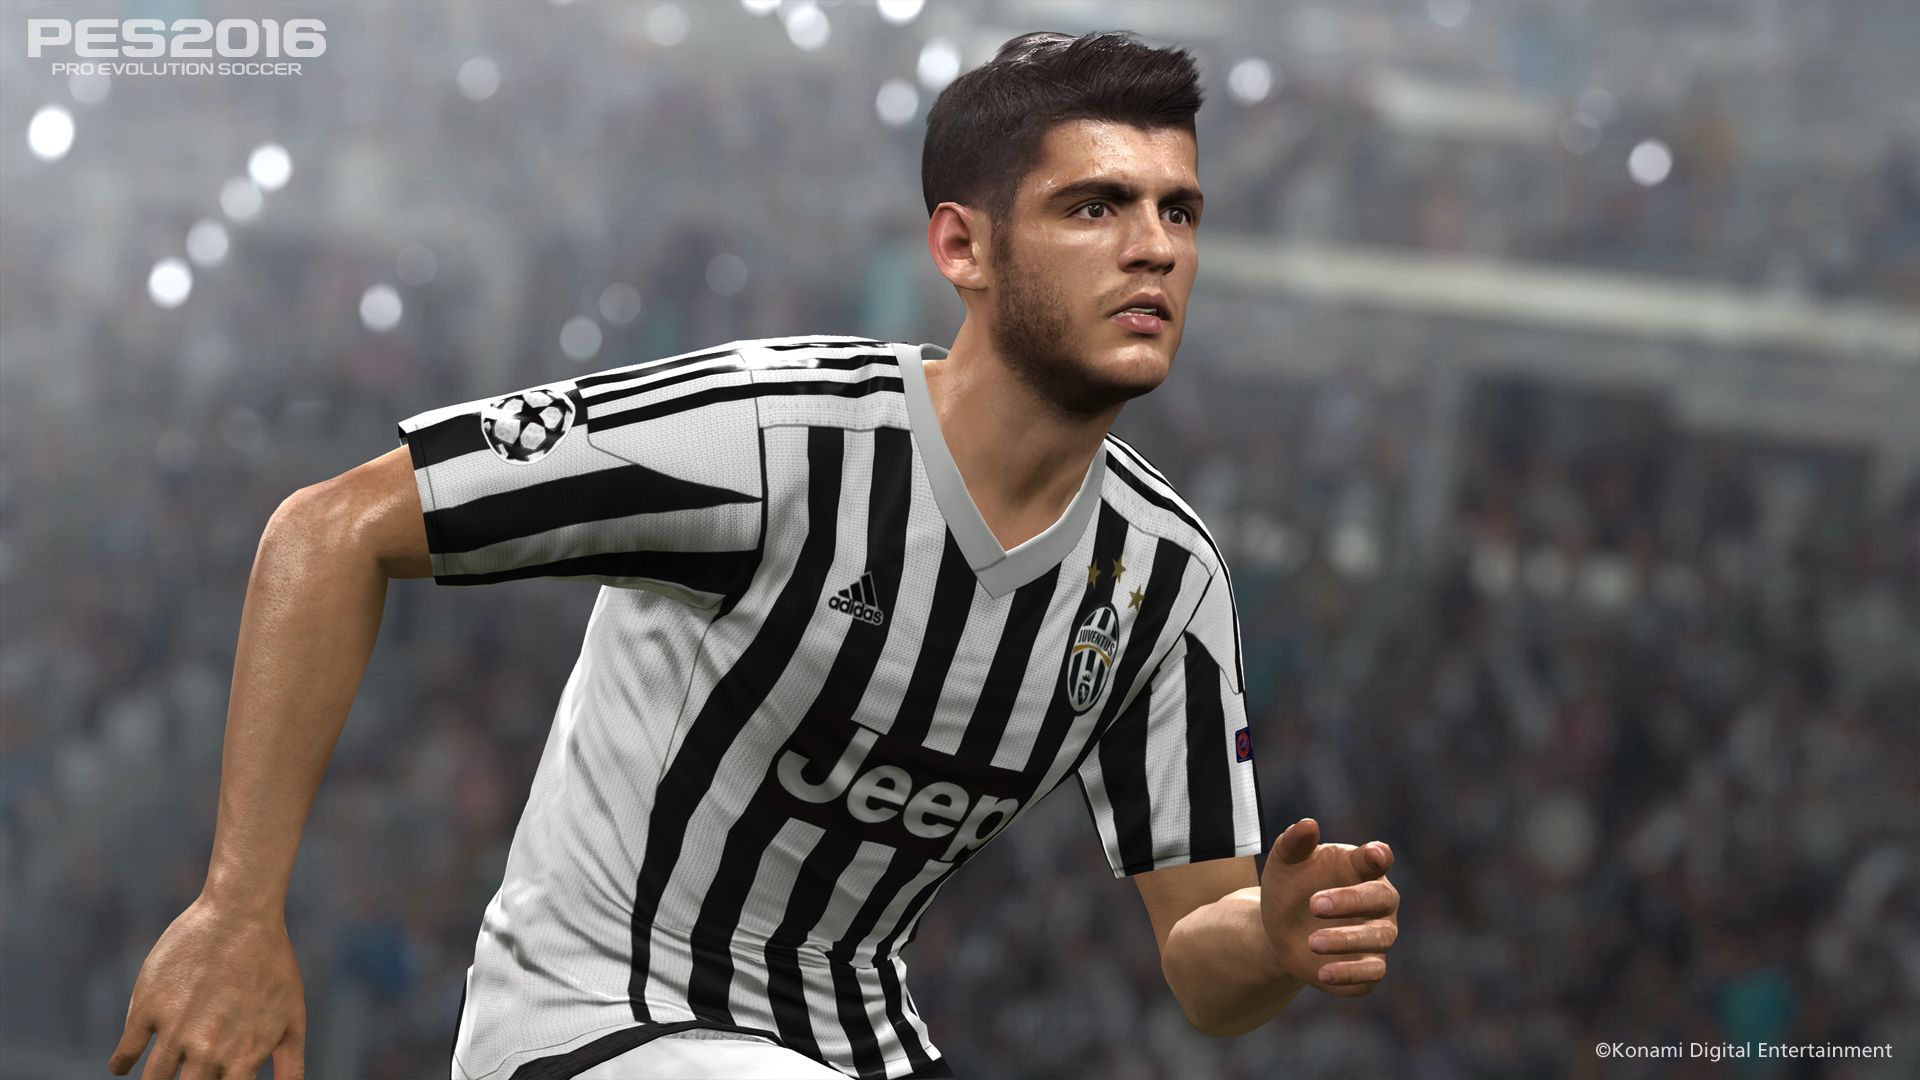 Pro Evolution Soccer 2016' is worth playing over 'FIFA